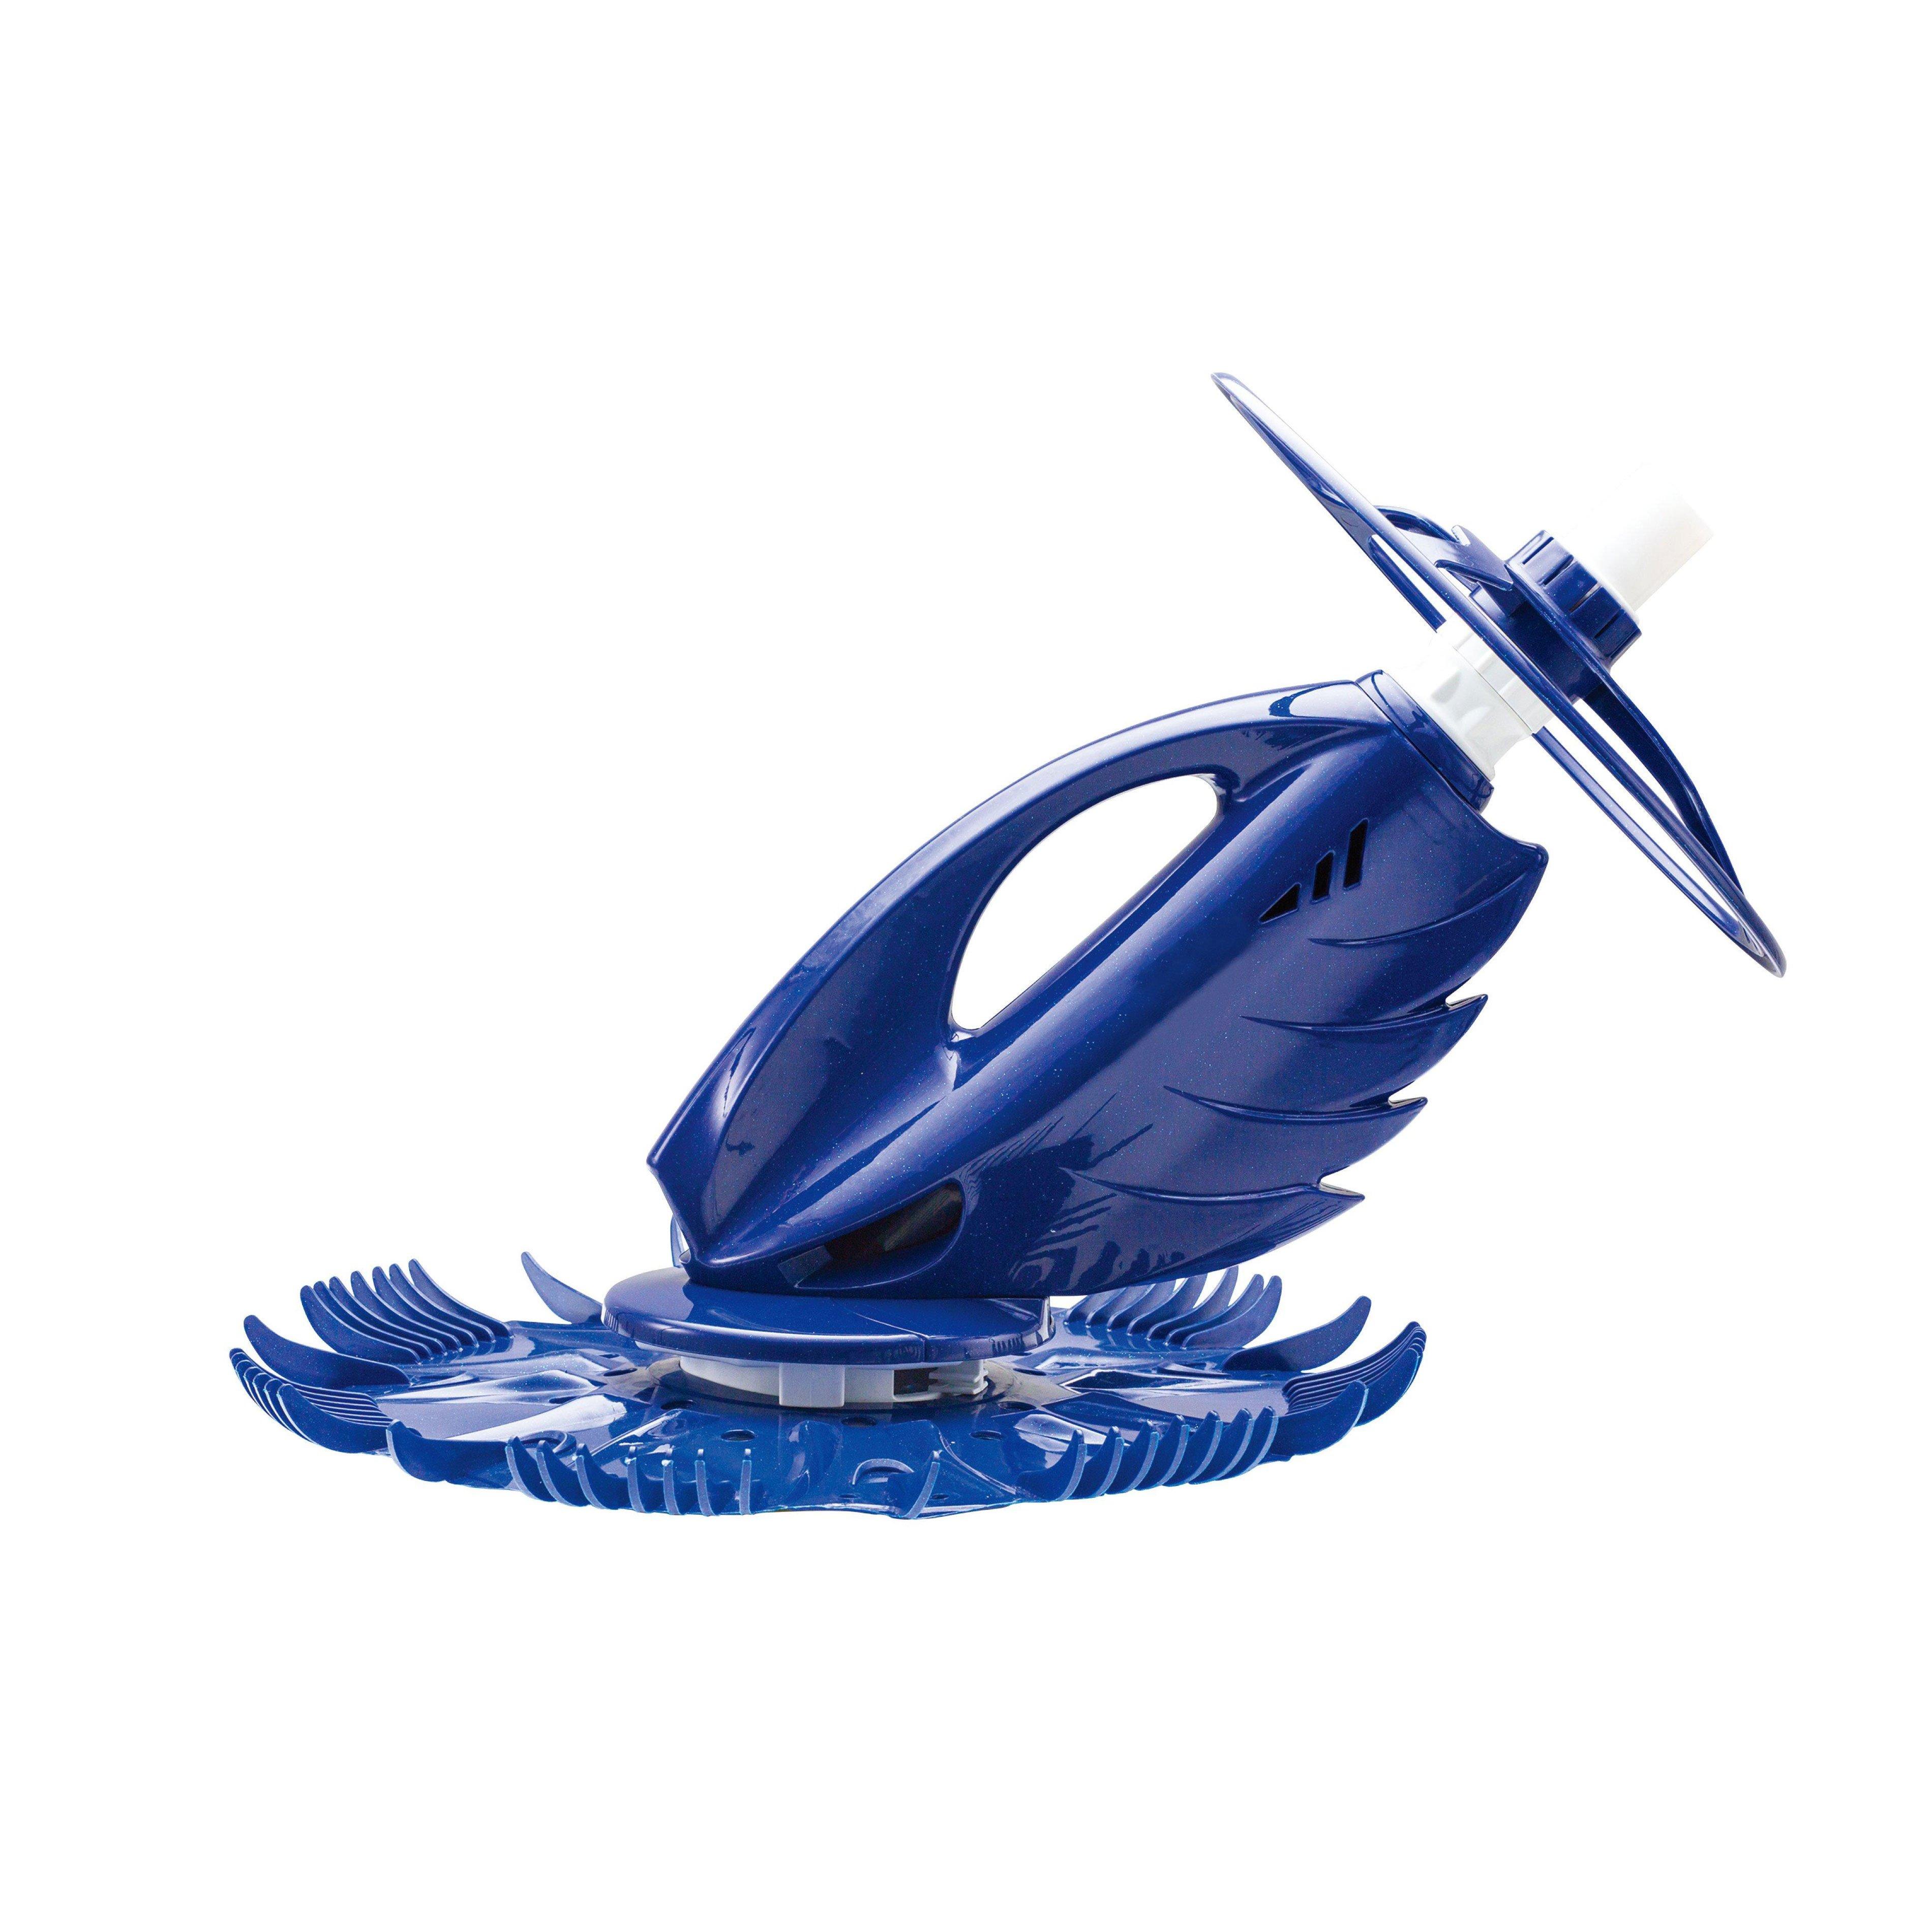 Jacuzzi  J-D300 Seahawk Suction Side Pool Cleaner